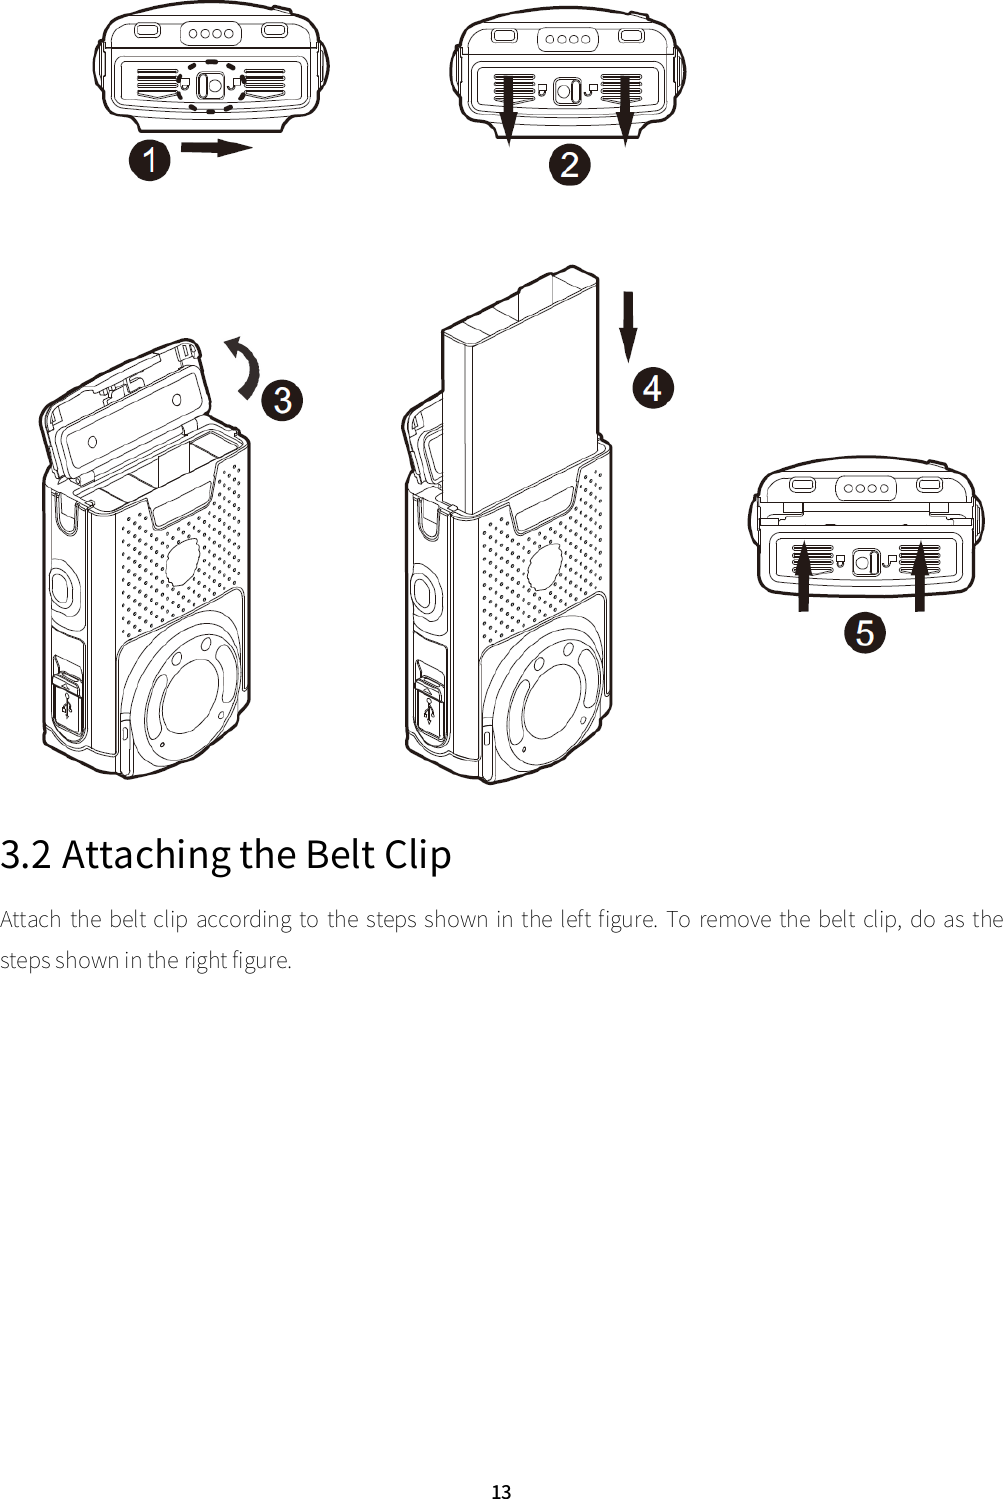  13  3.2 Attaching the Belt Clip Attach the belt clip according to the steps shown in the left figure. To remove the belt clip, do  as the steps shown in the right figure.   